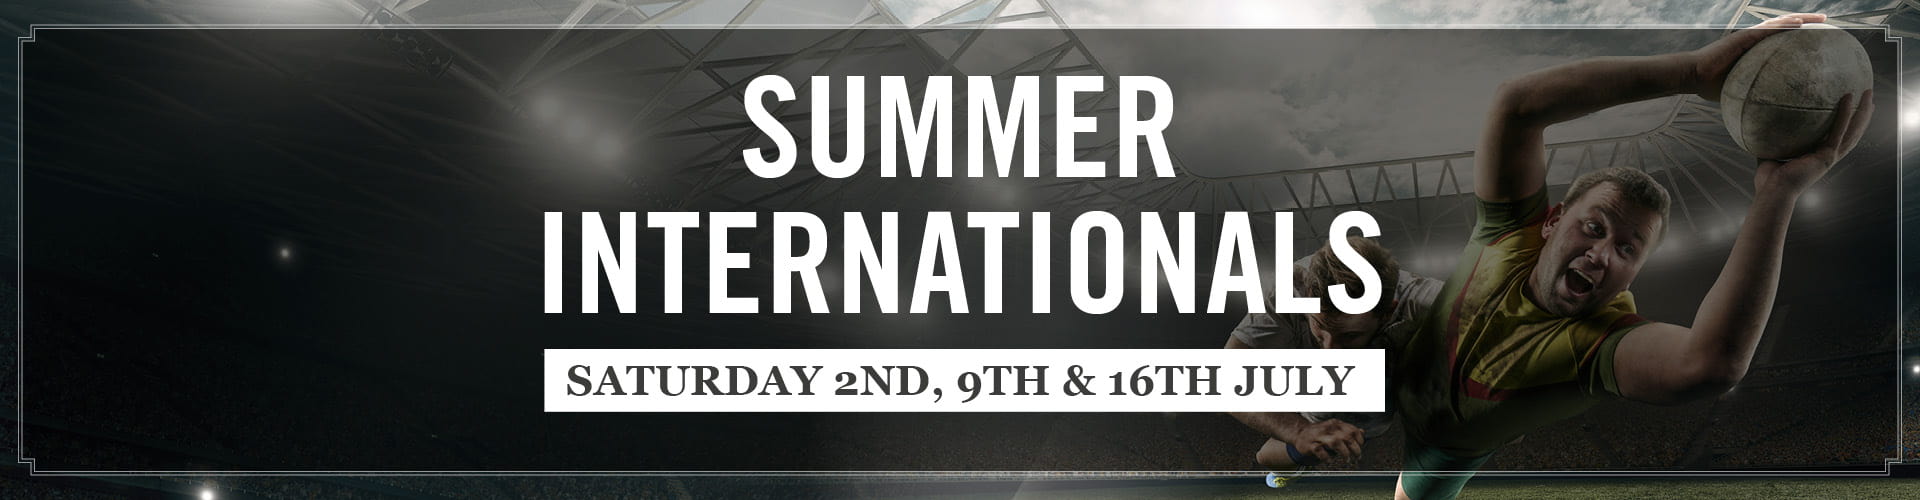 Watch Rugby Summer Internationals live at The Uxbridge Arms pub in London